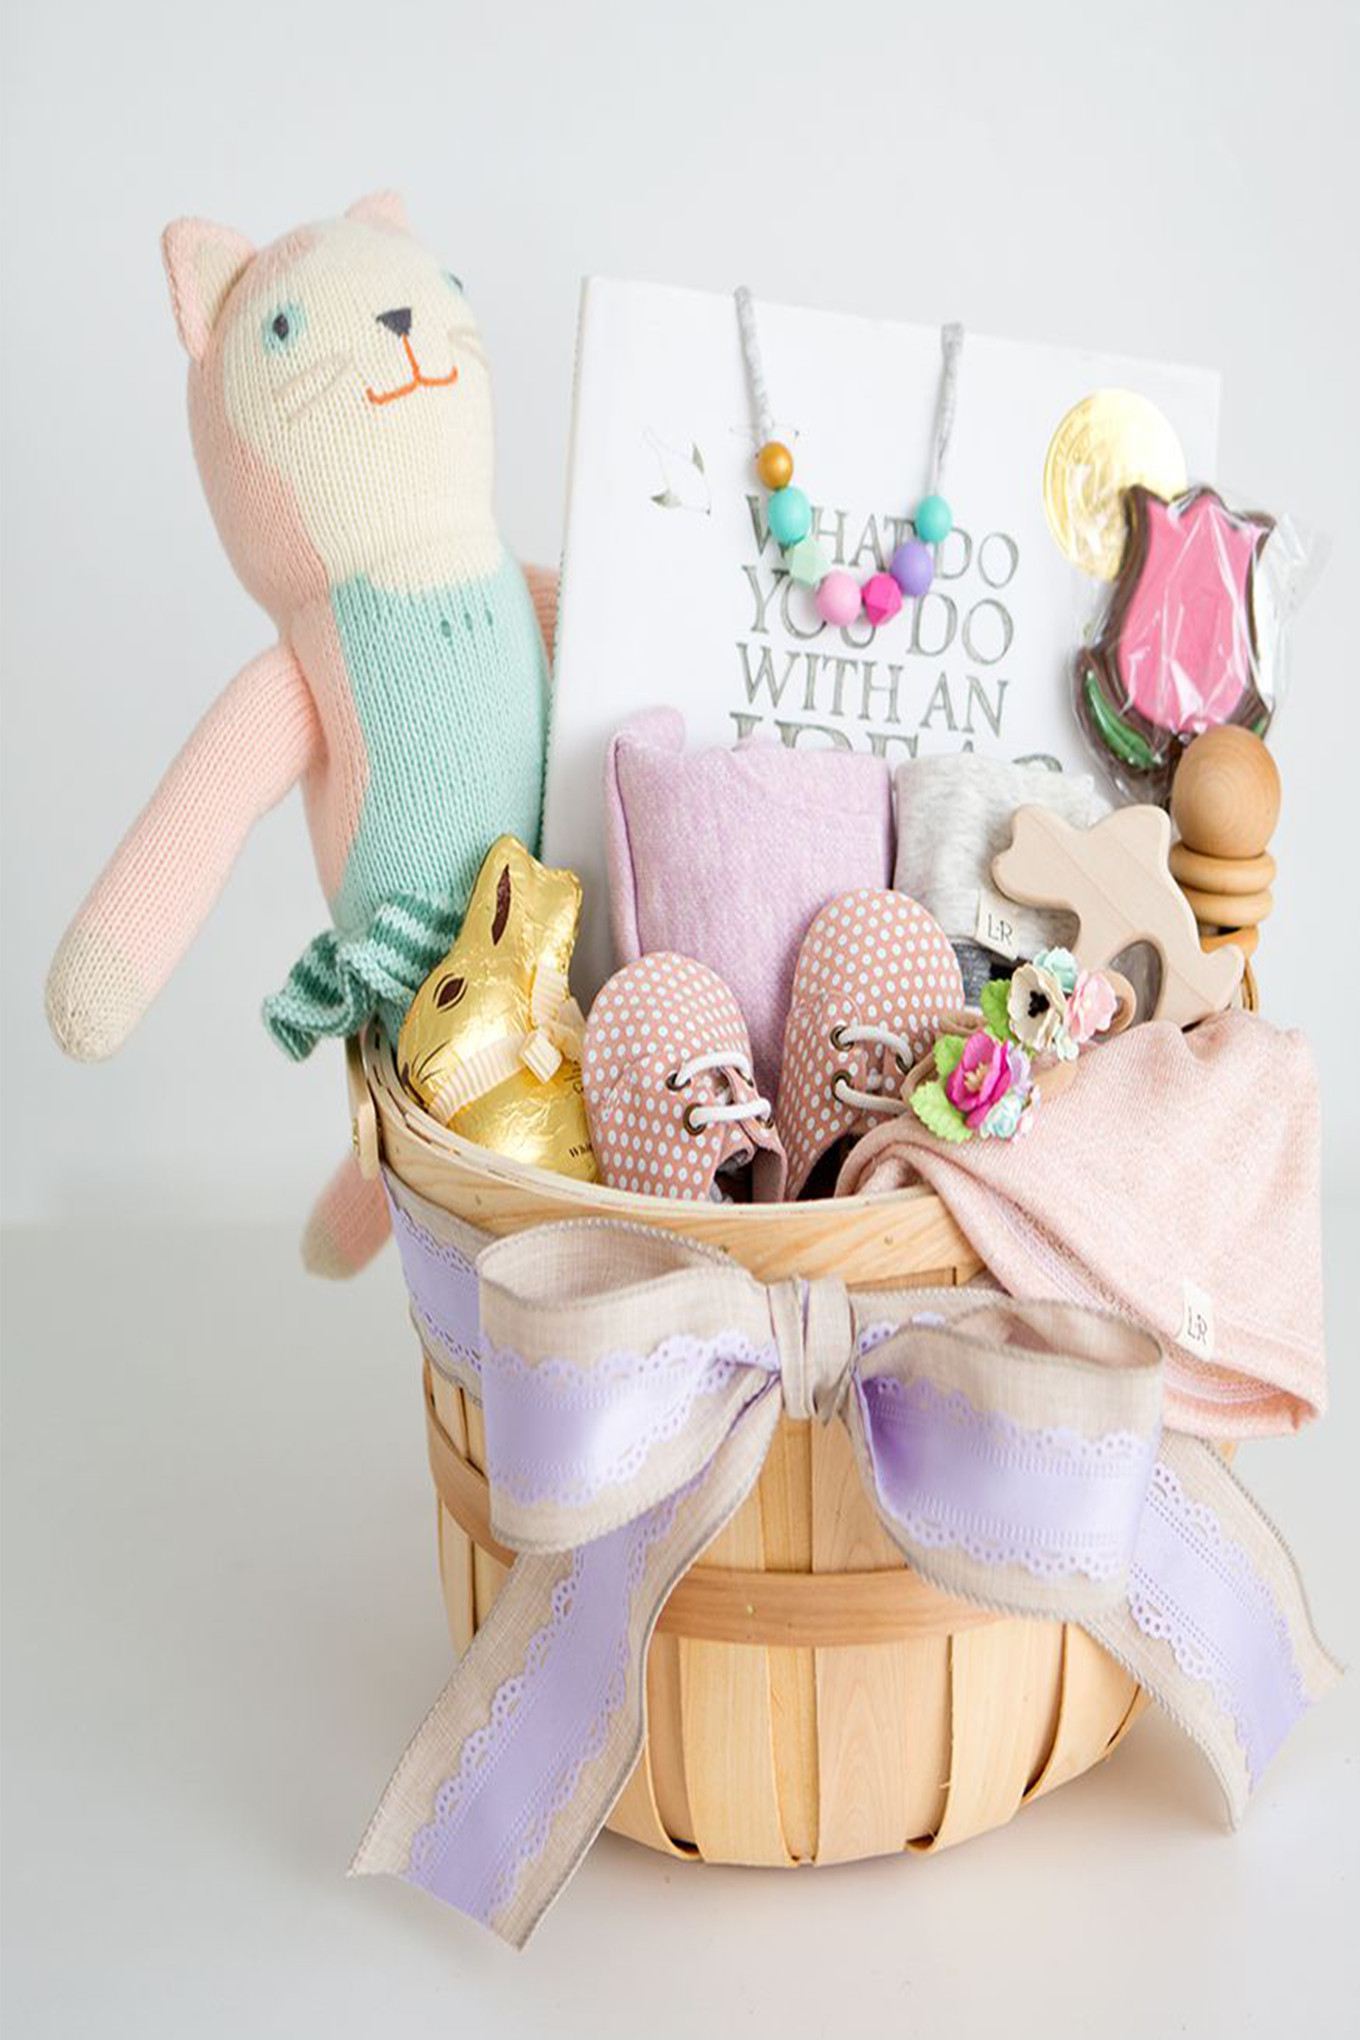 Cool Easter Baskets Ideas
 UNIQUE EASTER BASKET IDEAS SHOEGAL OUT IN THE WORLD